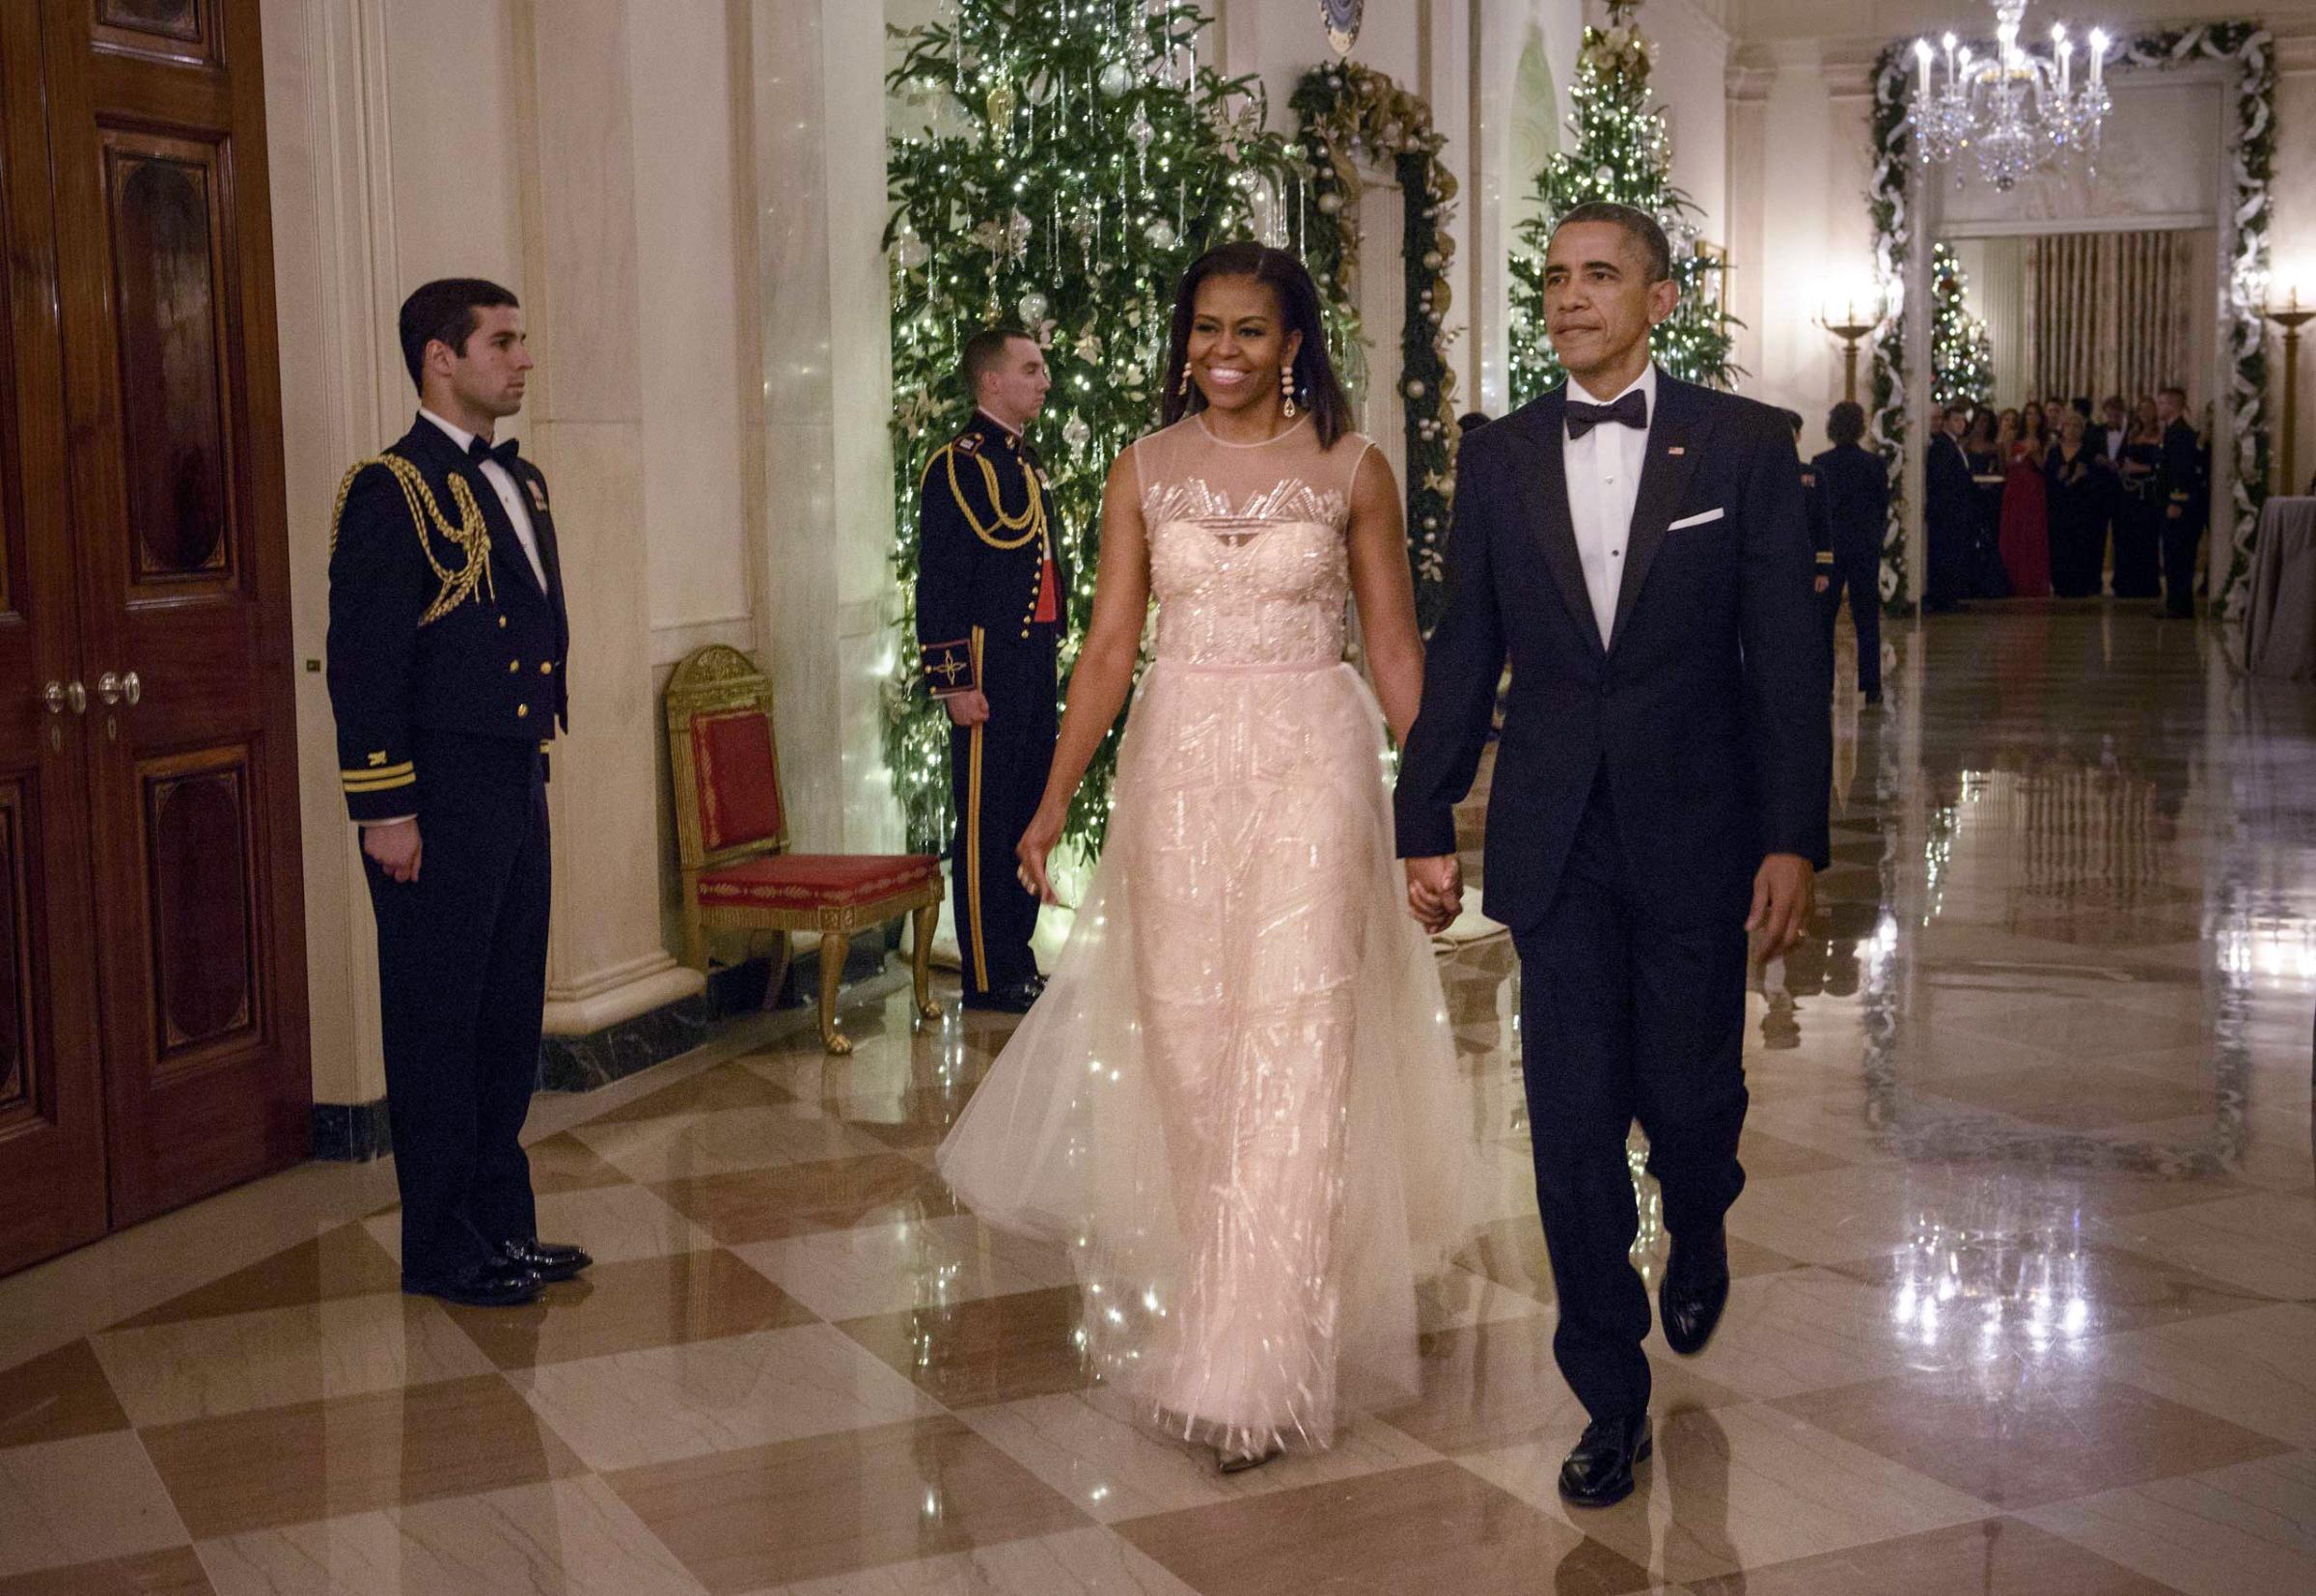 Michelle Obama Best Dresses Outfits 2014